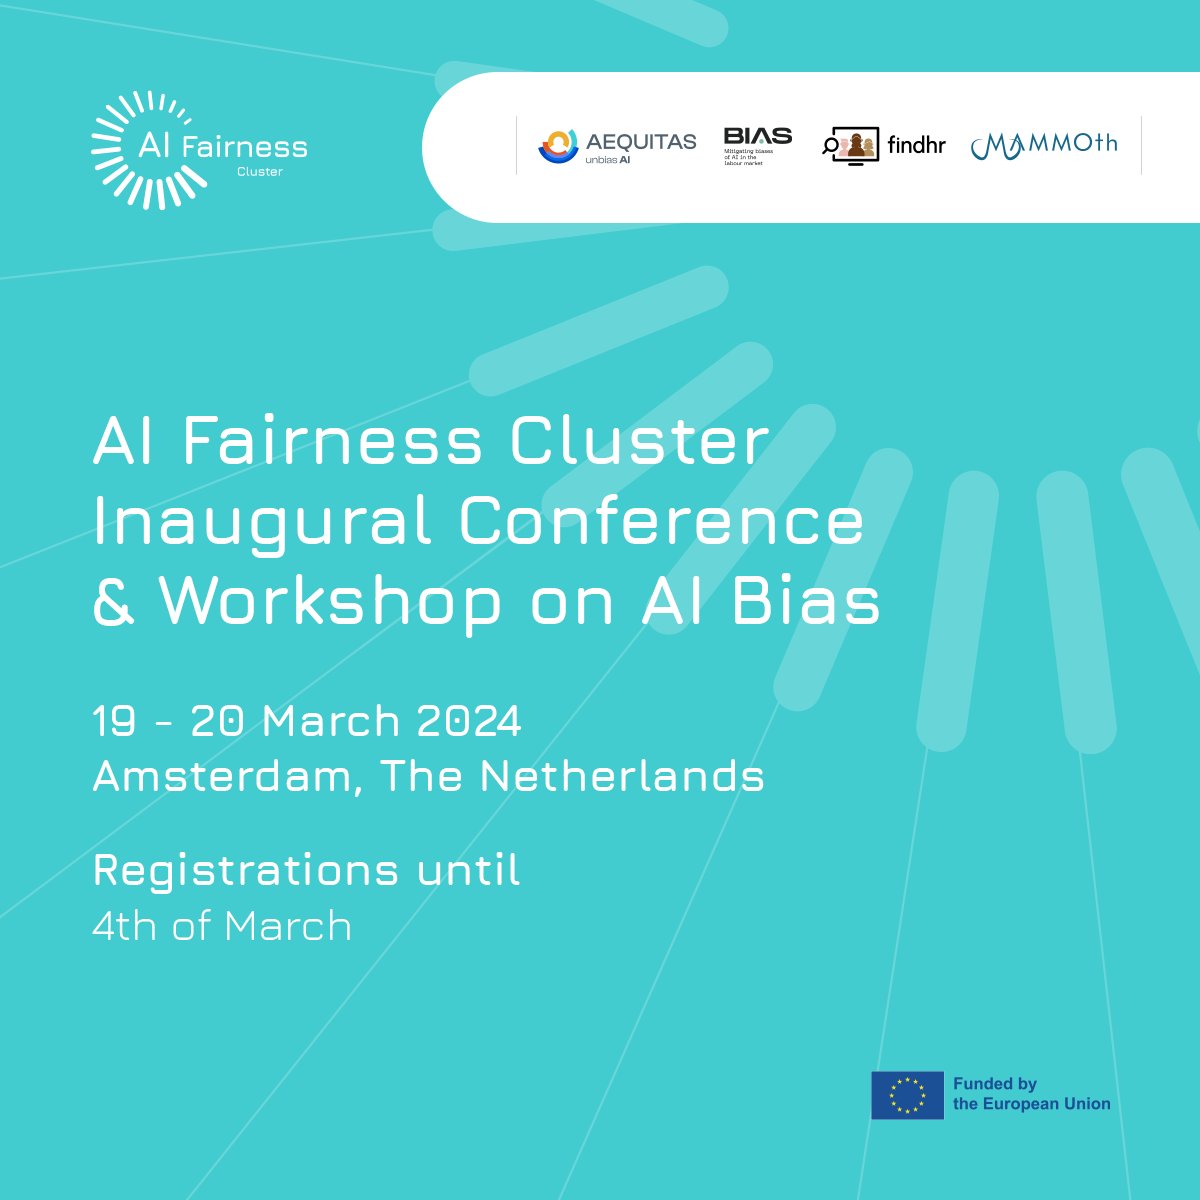 Excited to announce the AI Fairness Cluster Inaugural Conference & Workshop on AI Bias! 🗓️ When: 19-20 March 2024 📍 Where: Science Park Congress Center Venue, Amsterdam 🇳🇱 Register now👉: findhr.eu/ai-fairness-cl…